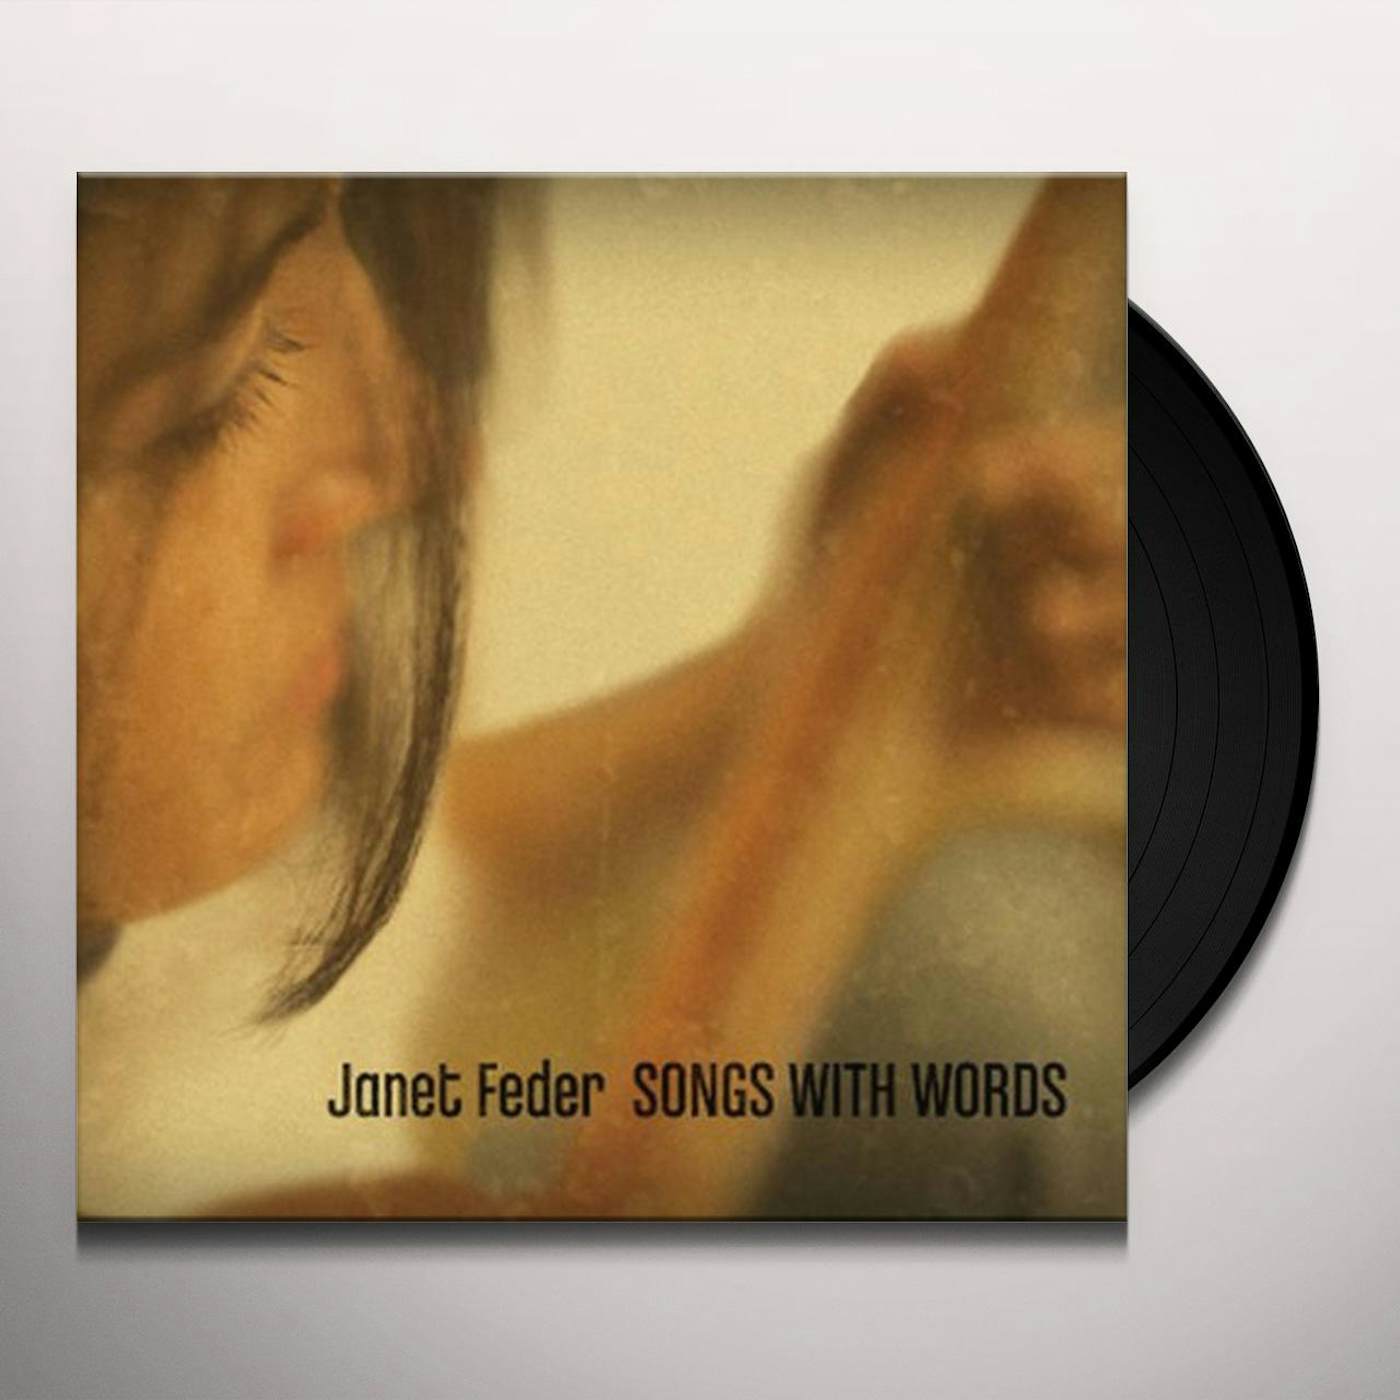 Janet Feder SONGS WITH WORDS